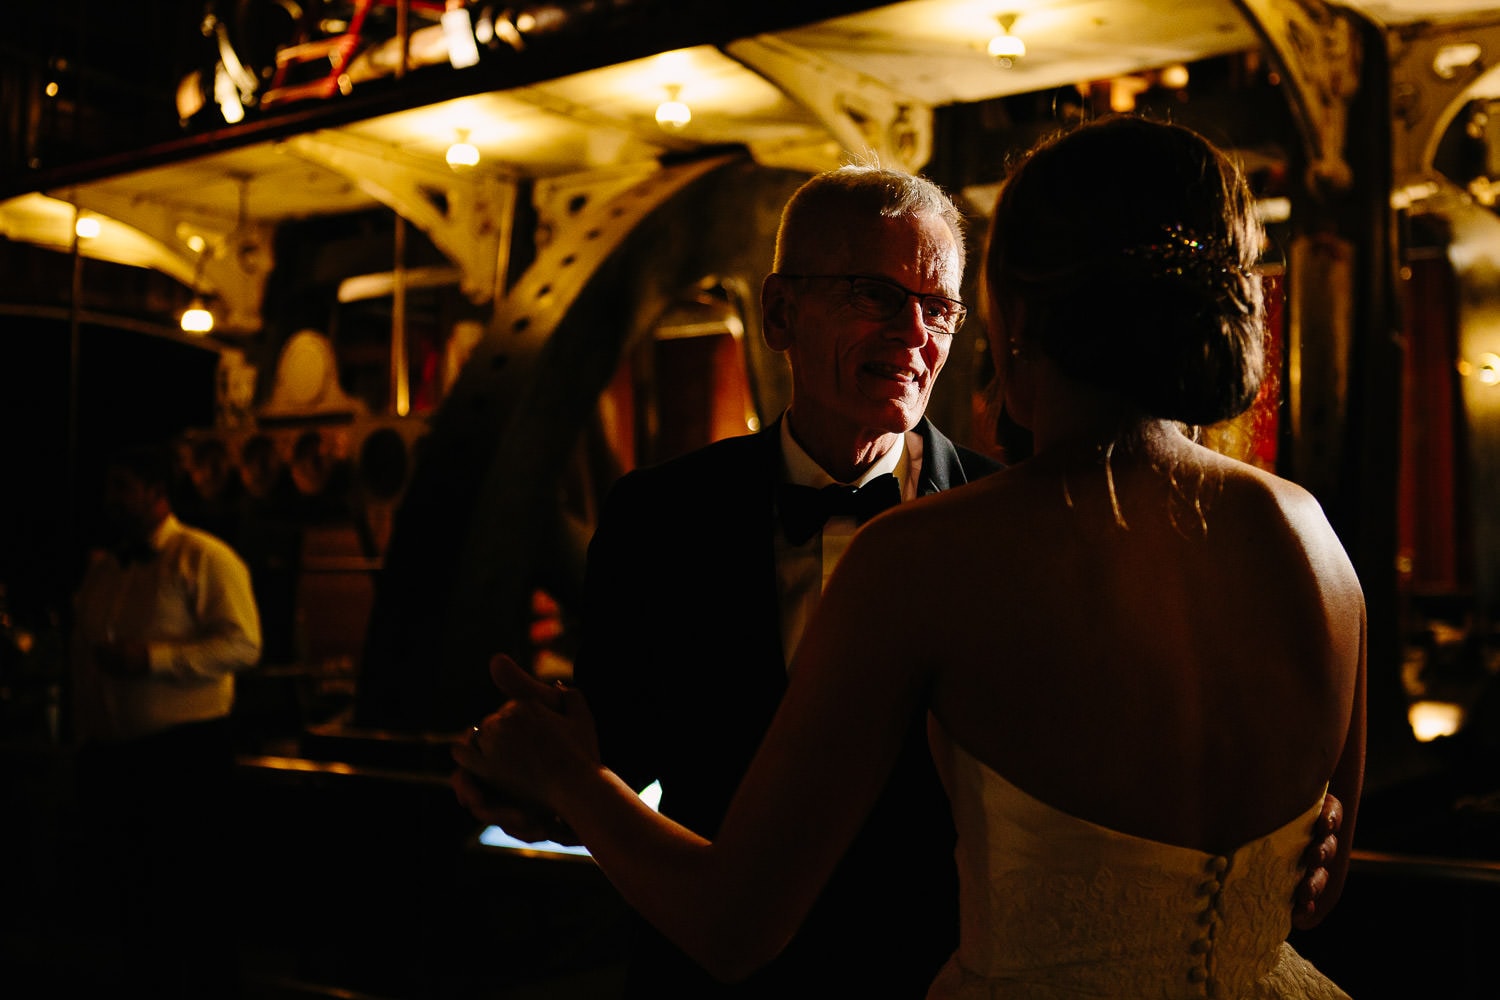 father-daughter wedding dance